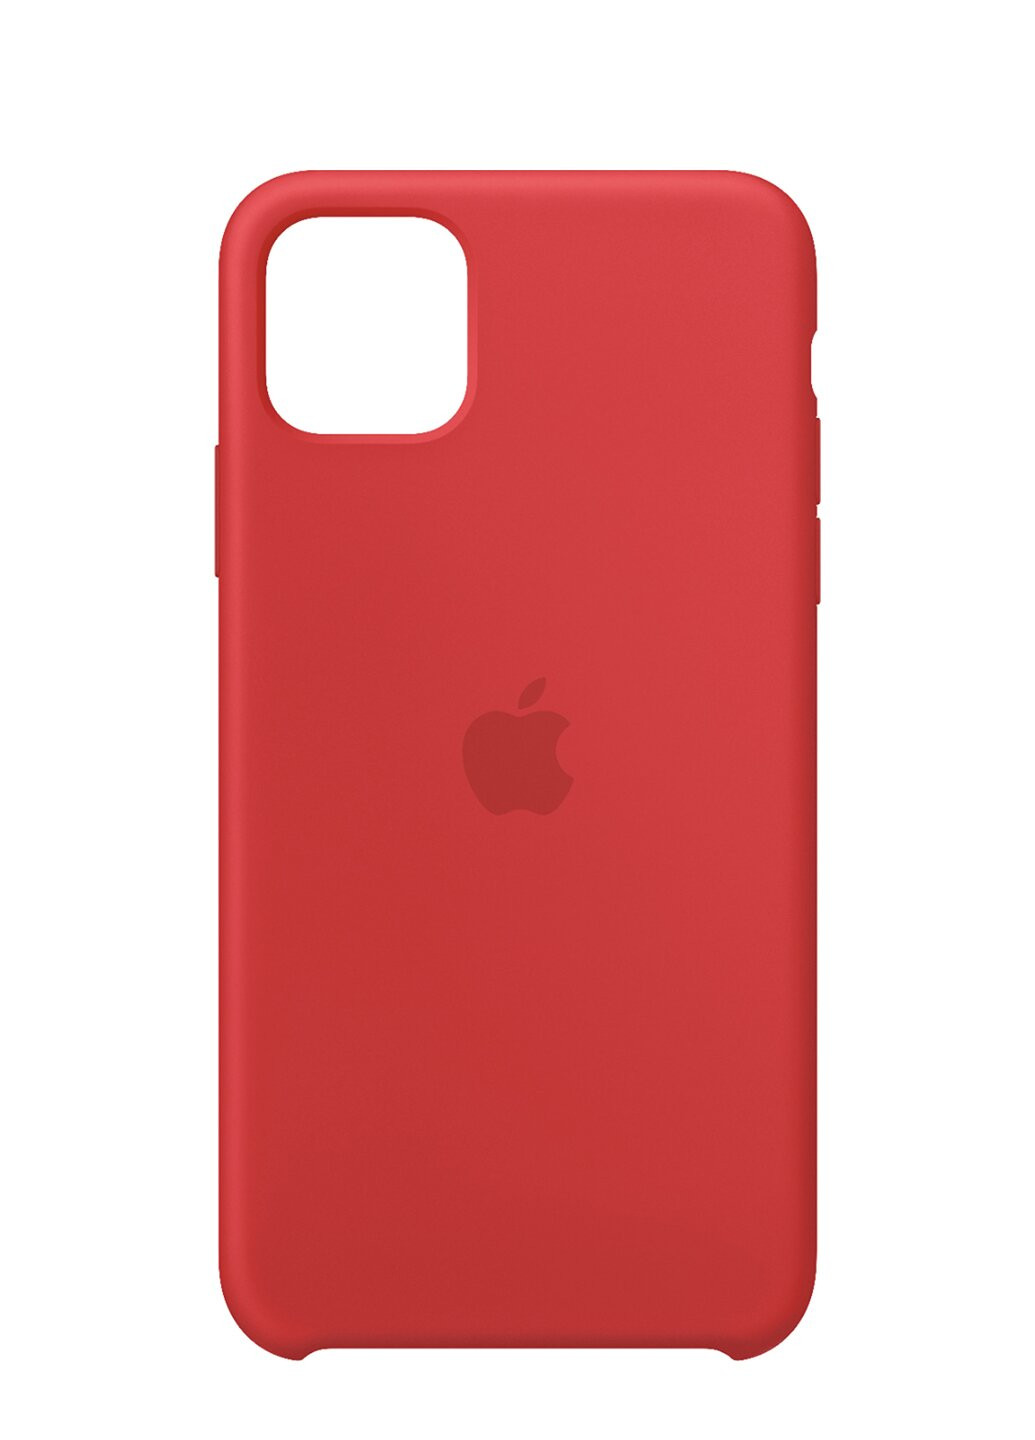 Чехол Silicone Case for iPhone 11 Pro Max Product Red Apple (220821496)